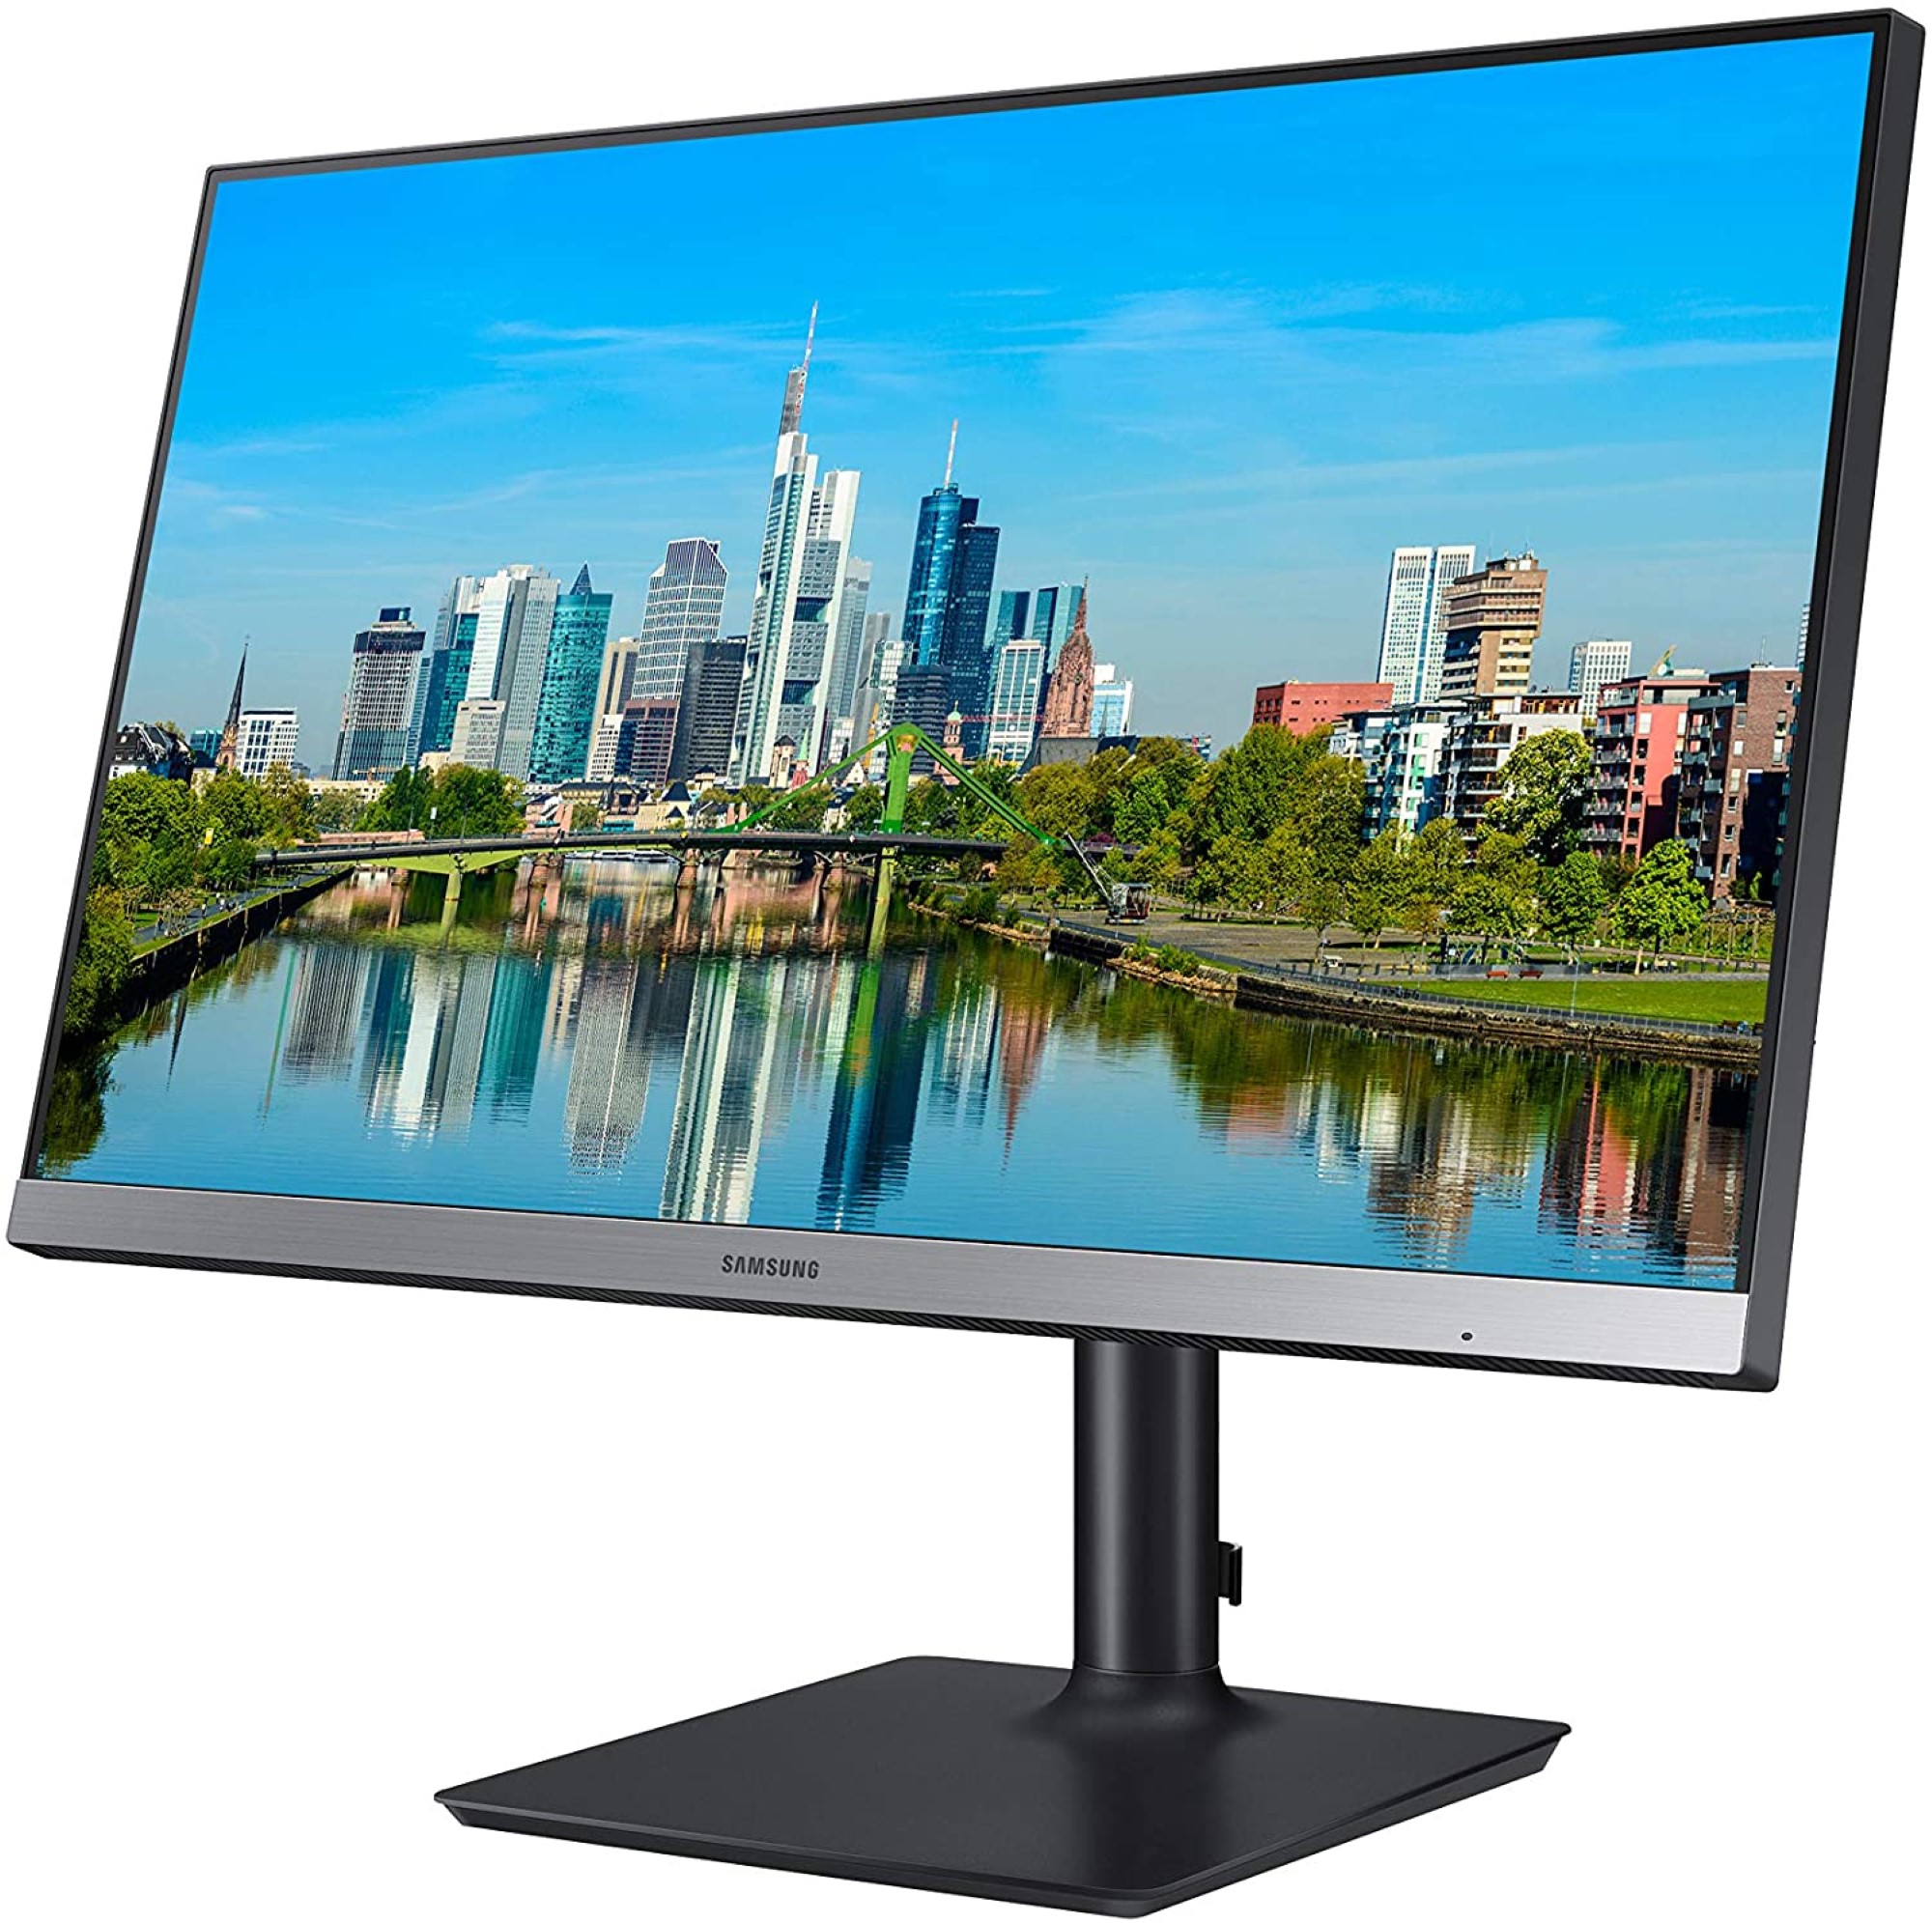 Samsung F24T650FYN Business FT650 24 inch 1080p 75Hz IPS Computer Monitor for Business with HDMI, DVI, DisplayPort, USB, HAS Stand - image 3 of 4